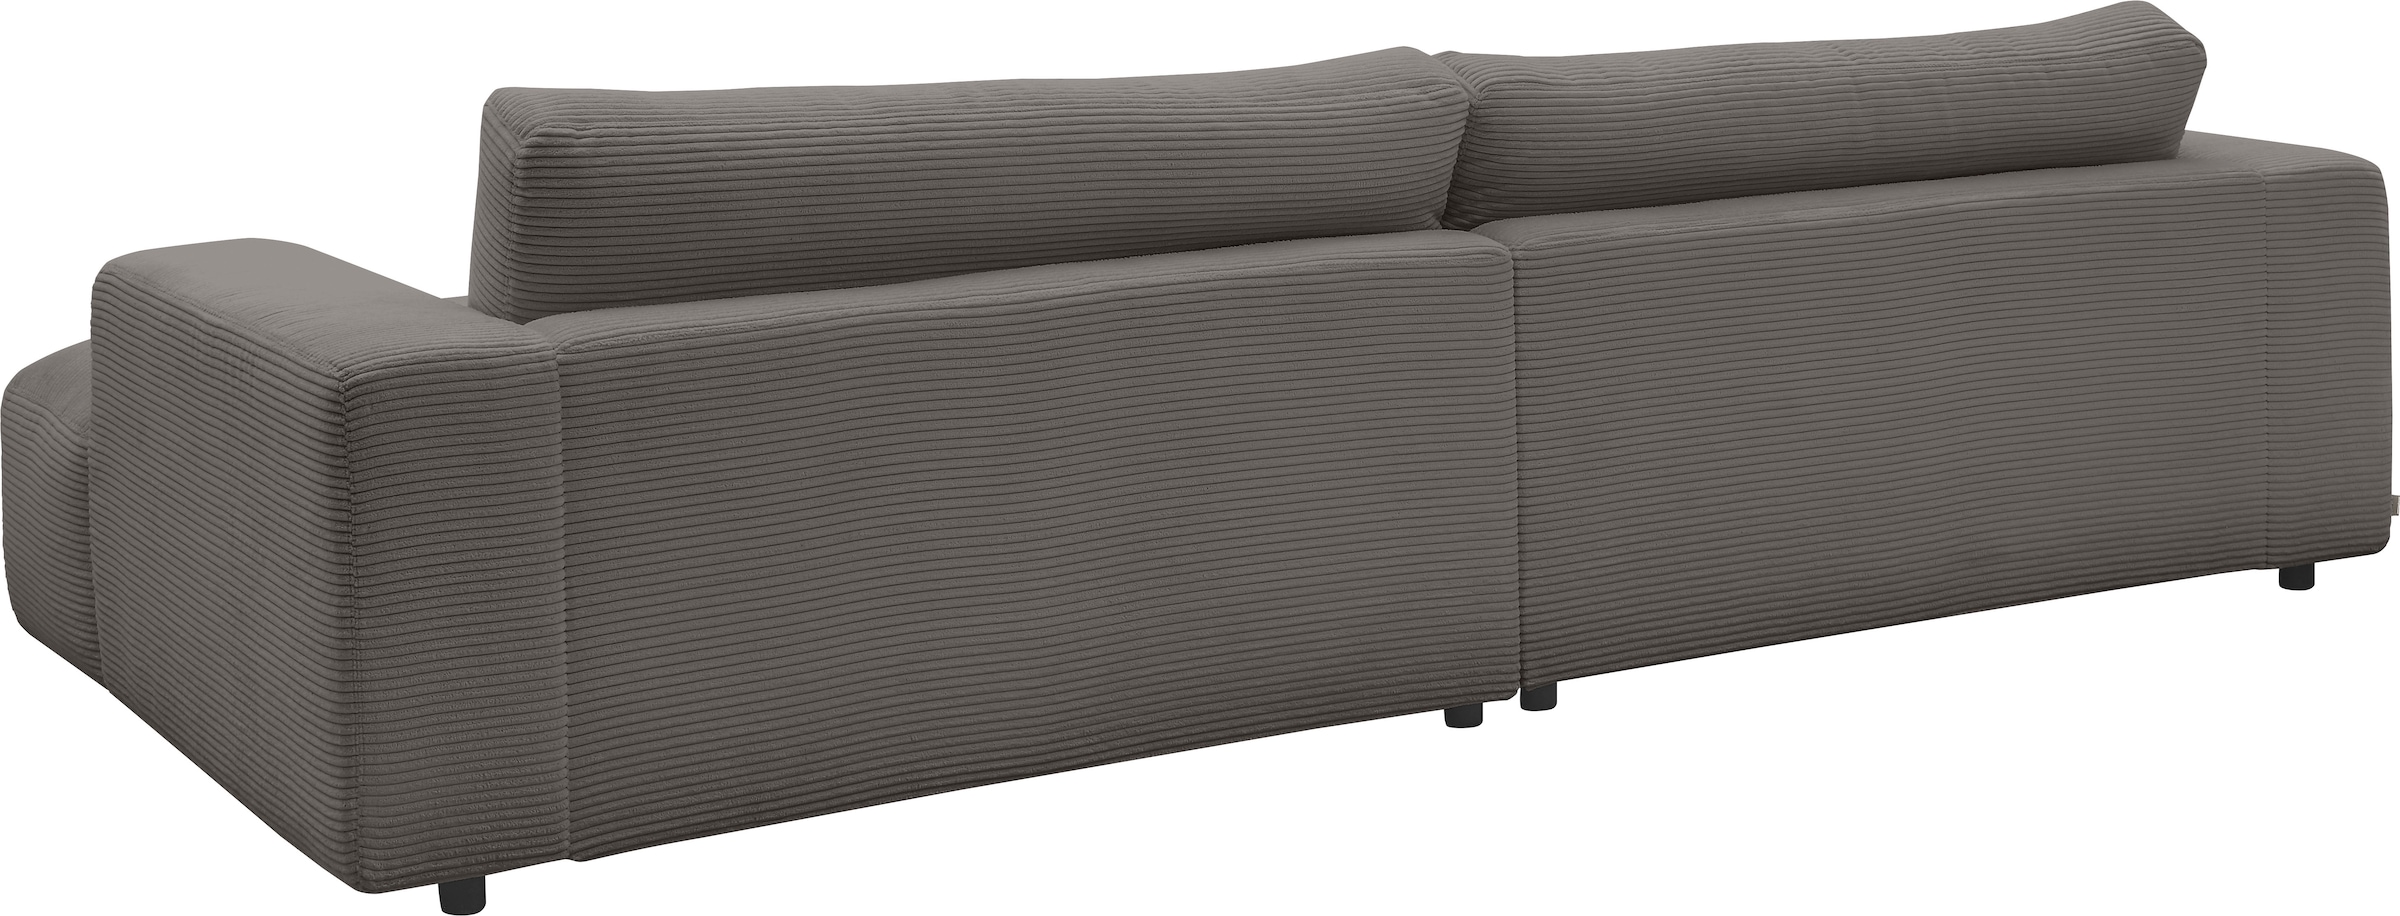 »Lucia«, Loungesofa M Cord-Bezug, 292 OTTO GALLERY Online cm Shop by branded Breite Musterring